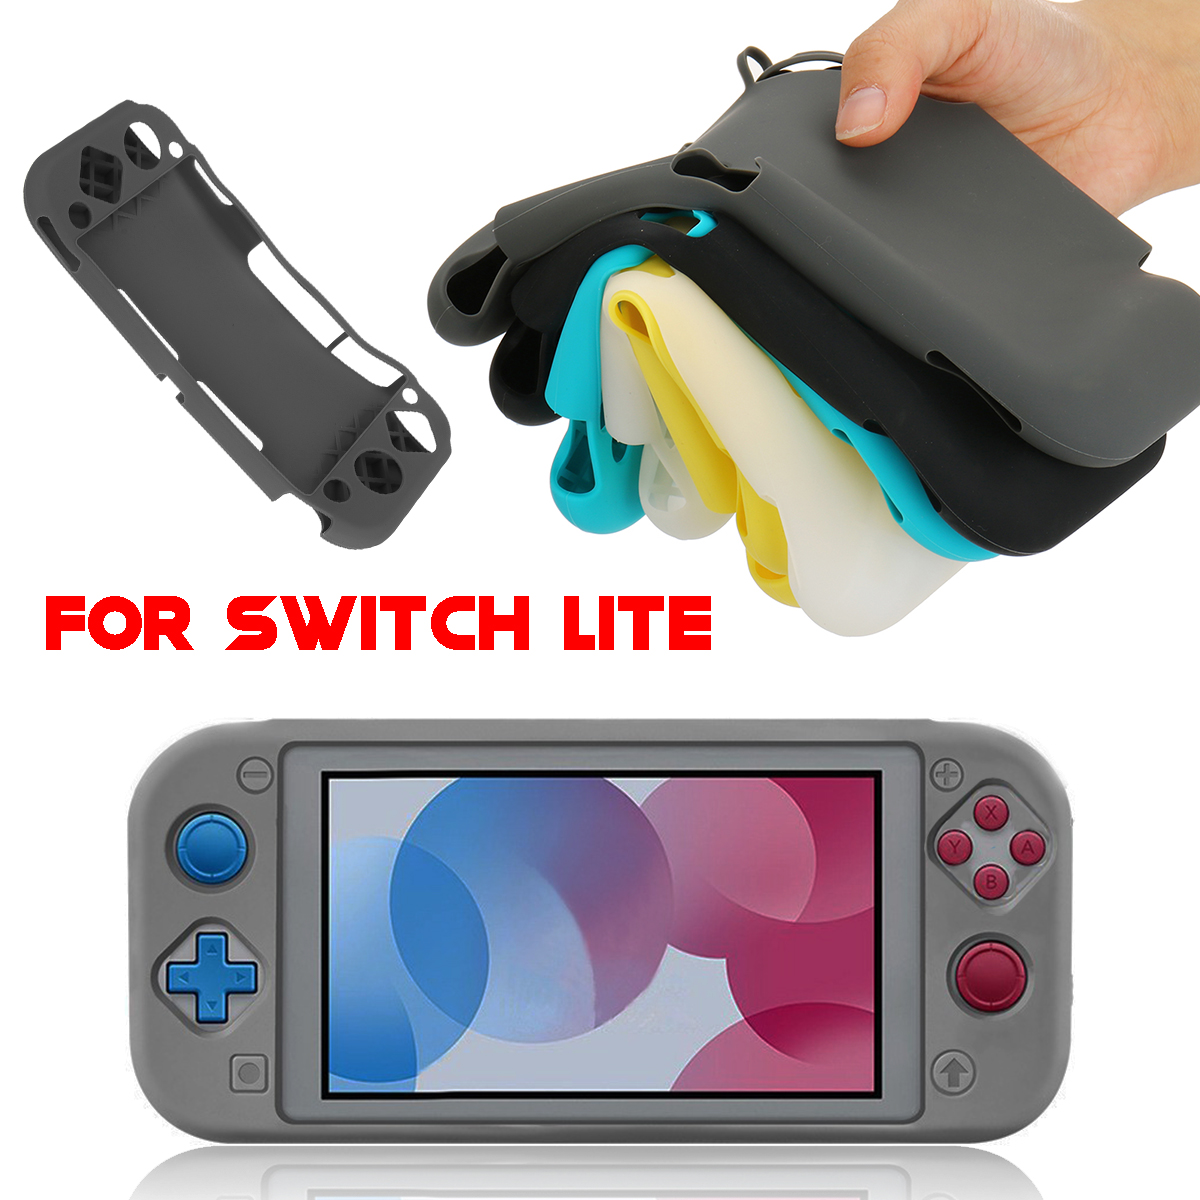 Protective Soft Silicone Case Cover Shell for Nintendo Switch Lite Game Console 16